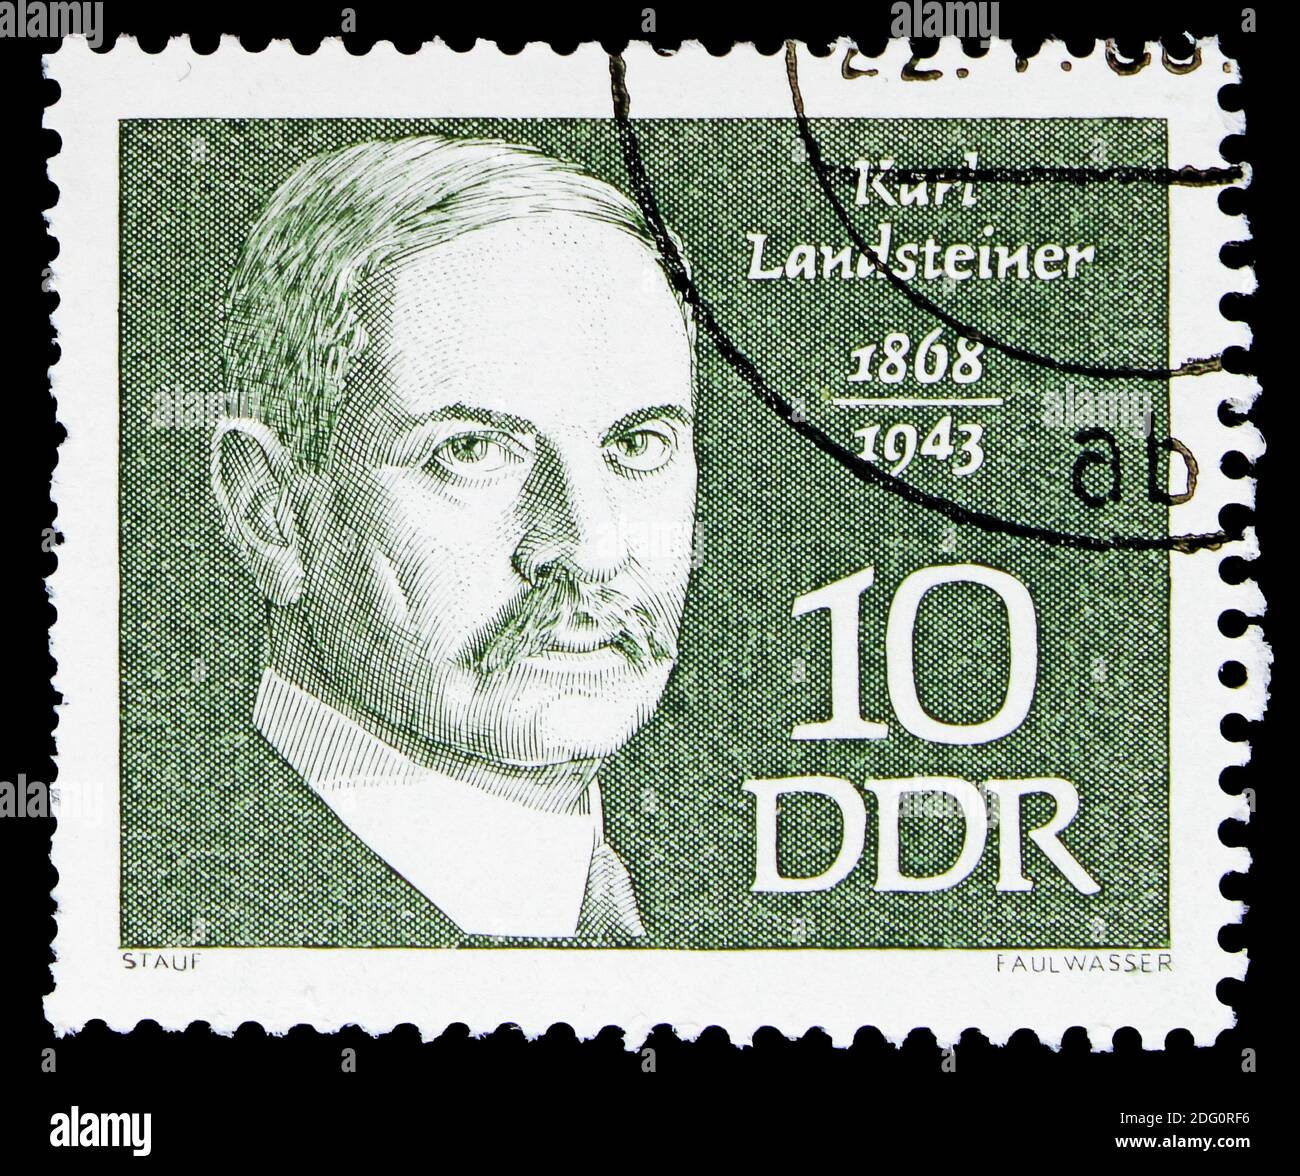 MOSCOW, RUSSIA - MAY 16, 2018: A stamp printed in German Democratic Republic shows Landsteiner, Karl, Famous people serie, circa 1968 Stock Photo